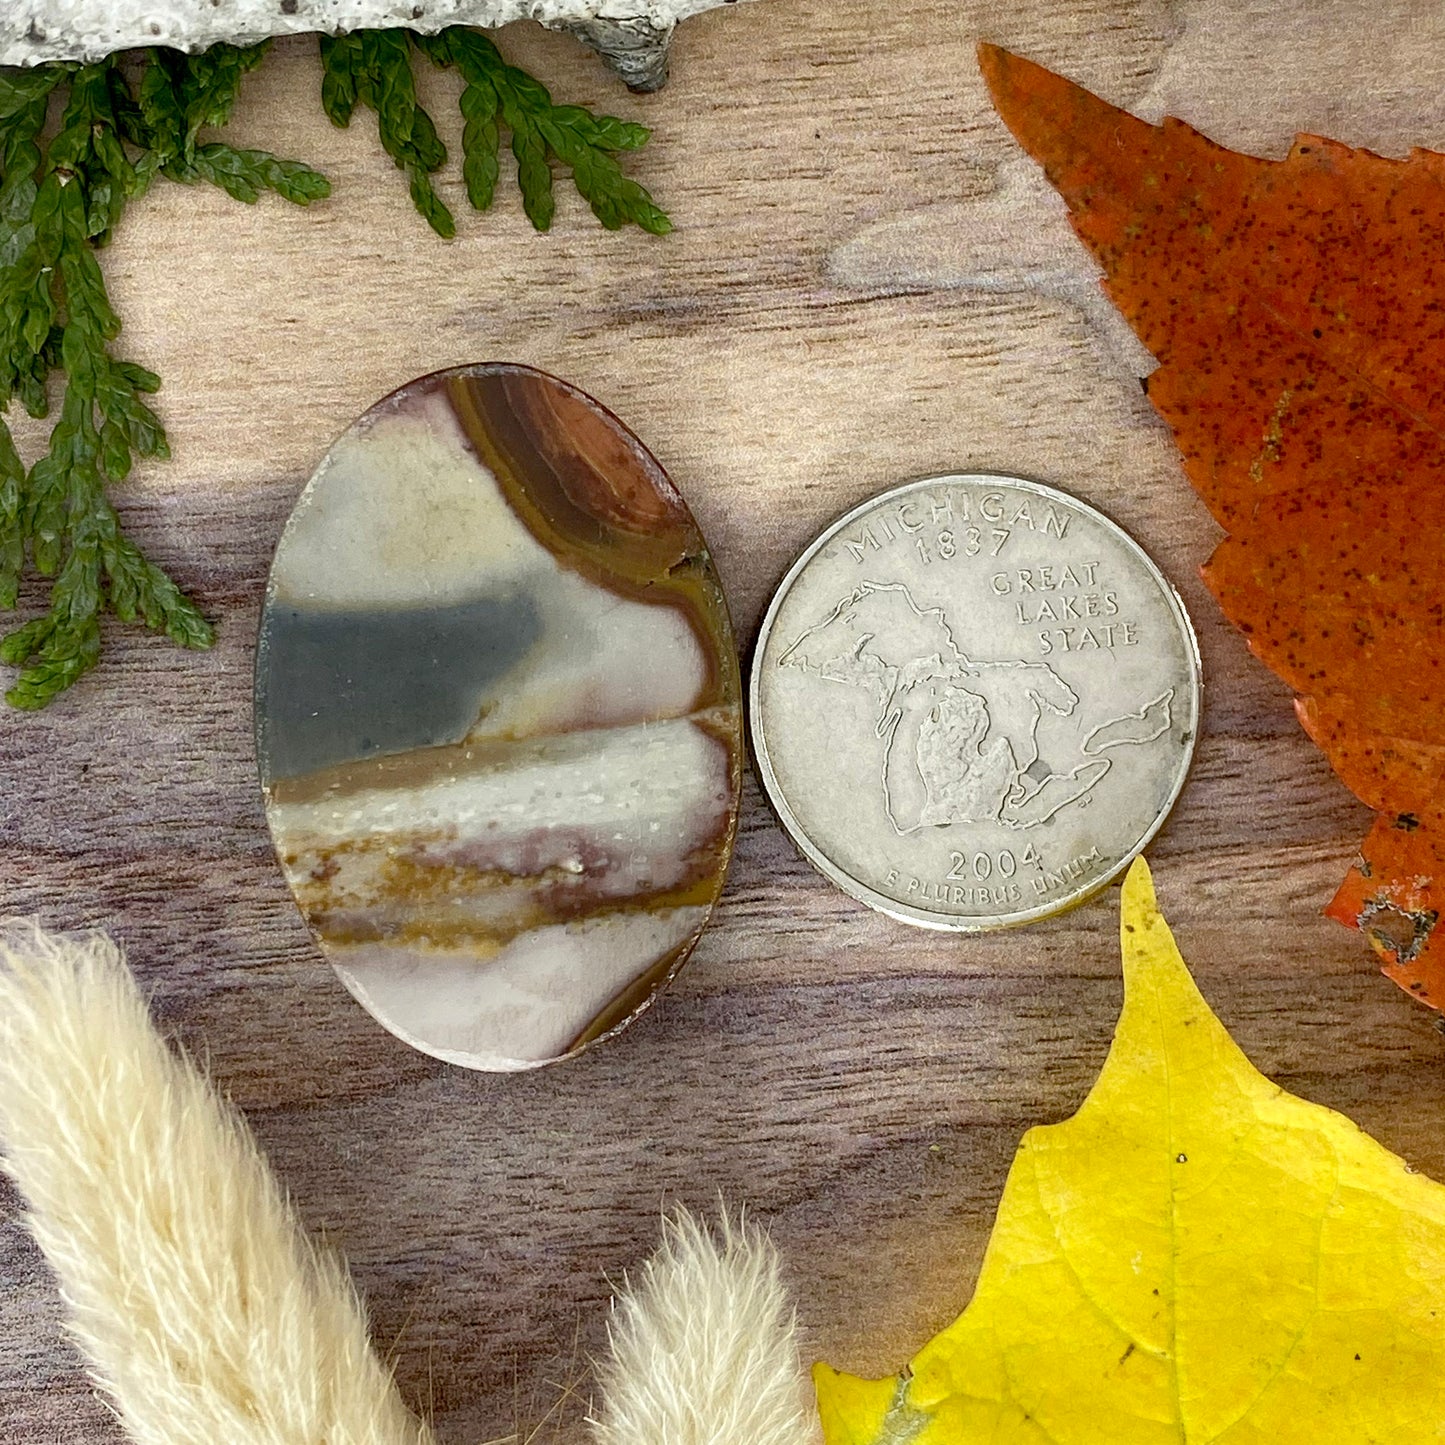 Polychrome Jasper Cabochon Back View - Stone Treasures by the Lake